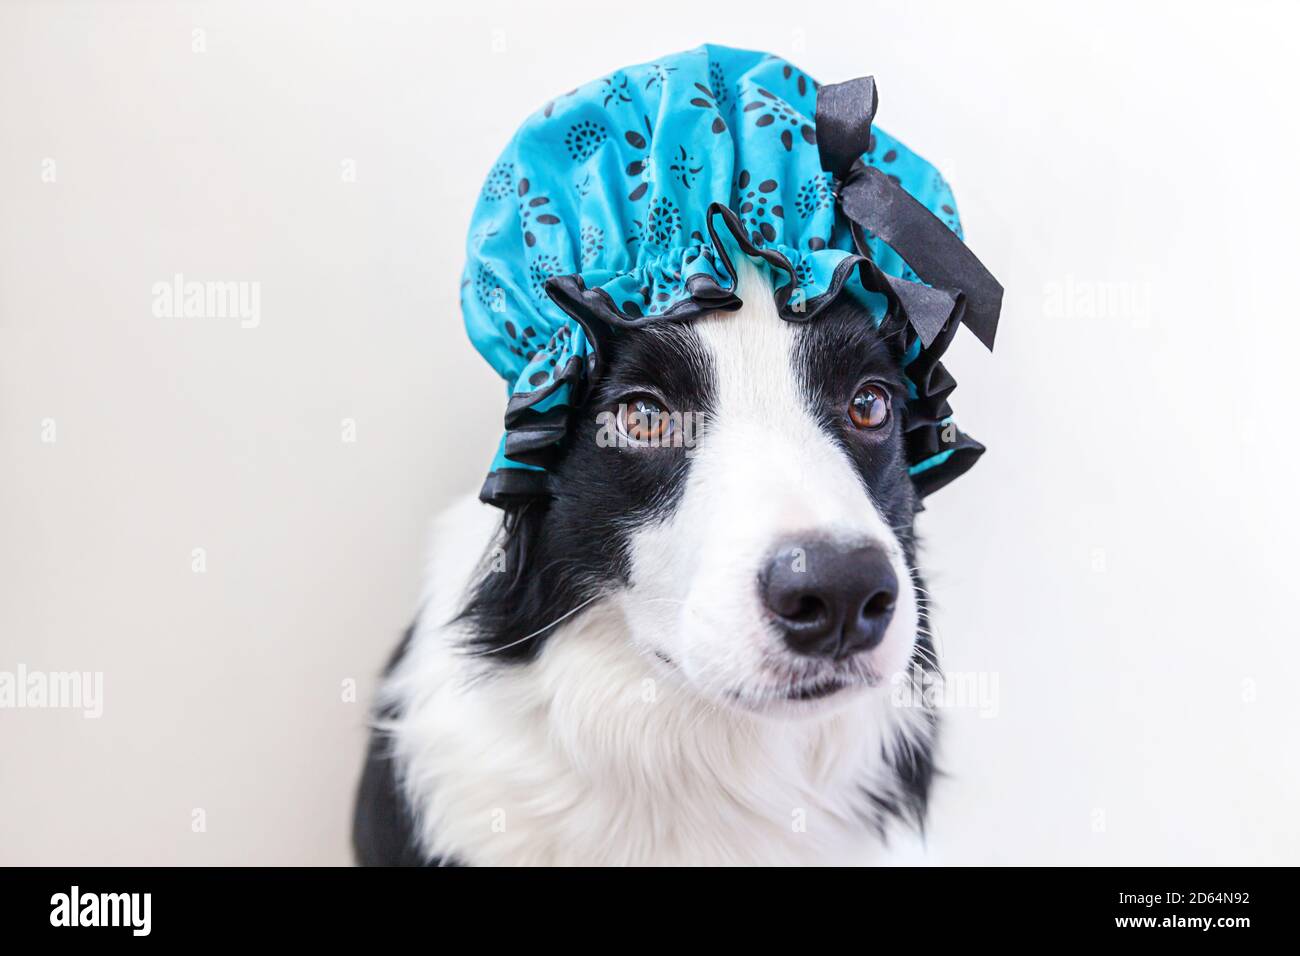 Funny studio portrait of cute puppy dog border collie wearing shower cap isolated on white background. Cute little dog ready for wash in bathroom. Spa treatments in grooming salon Stock Photo